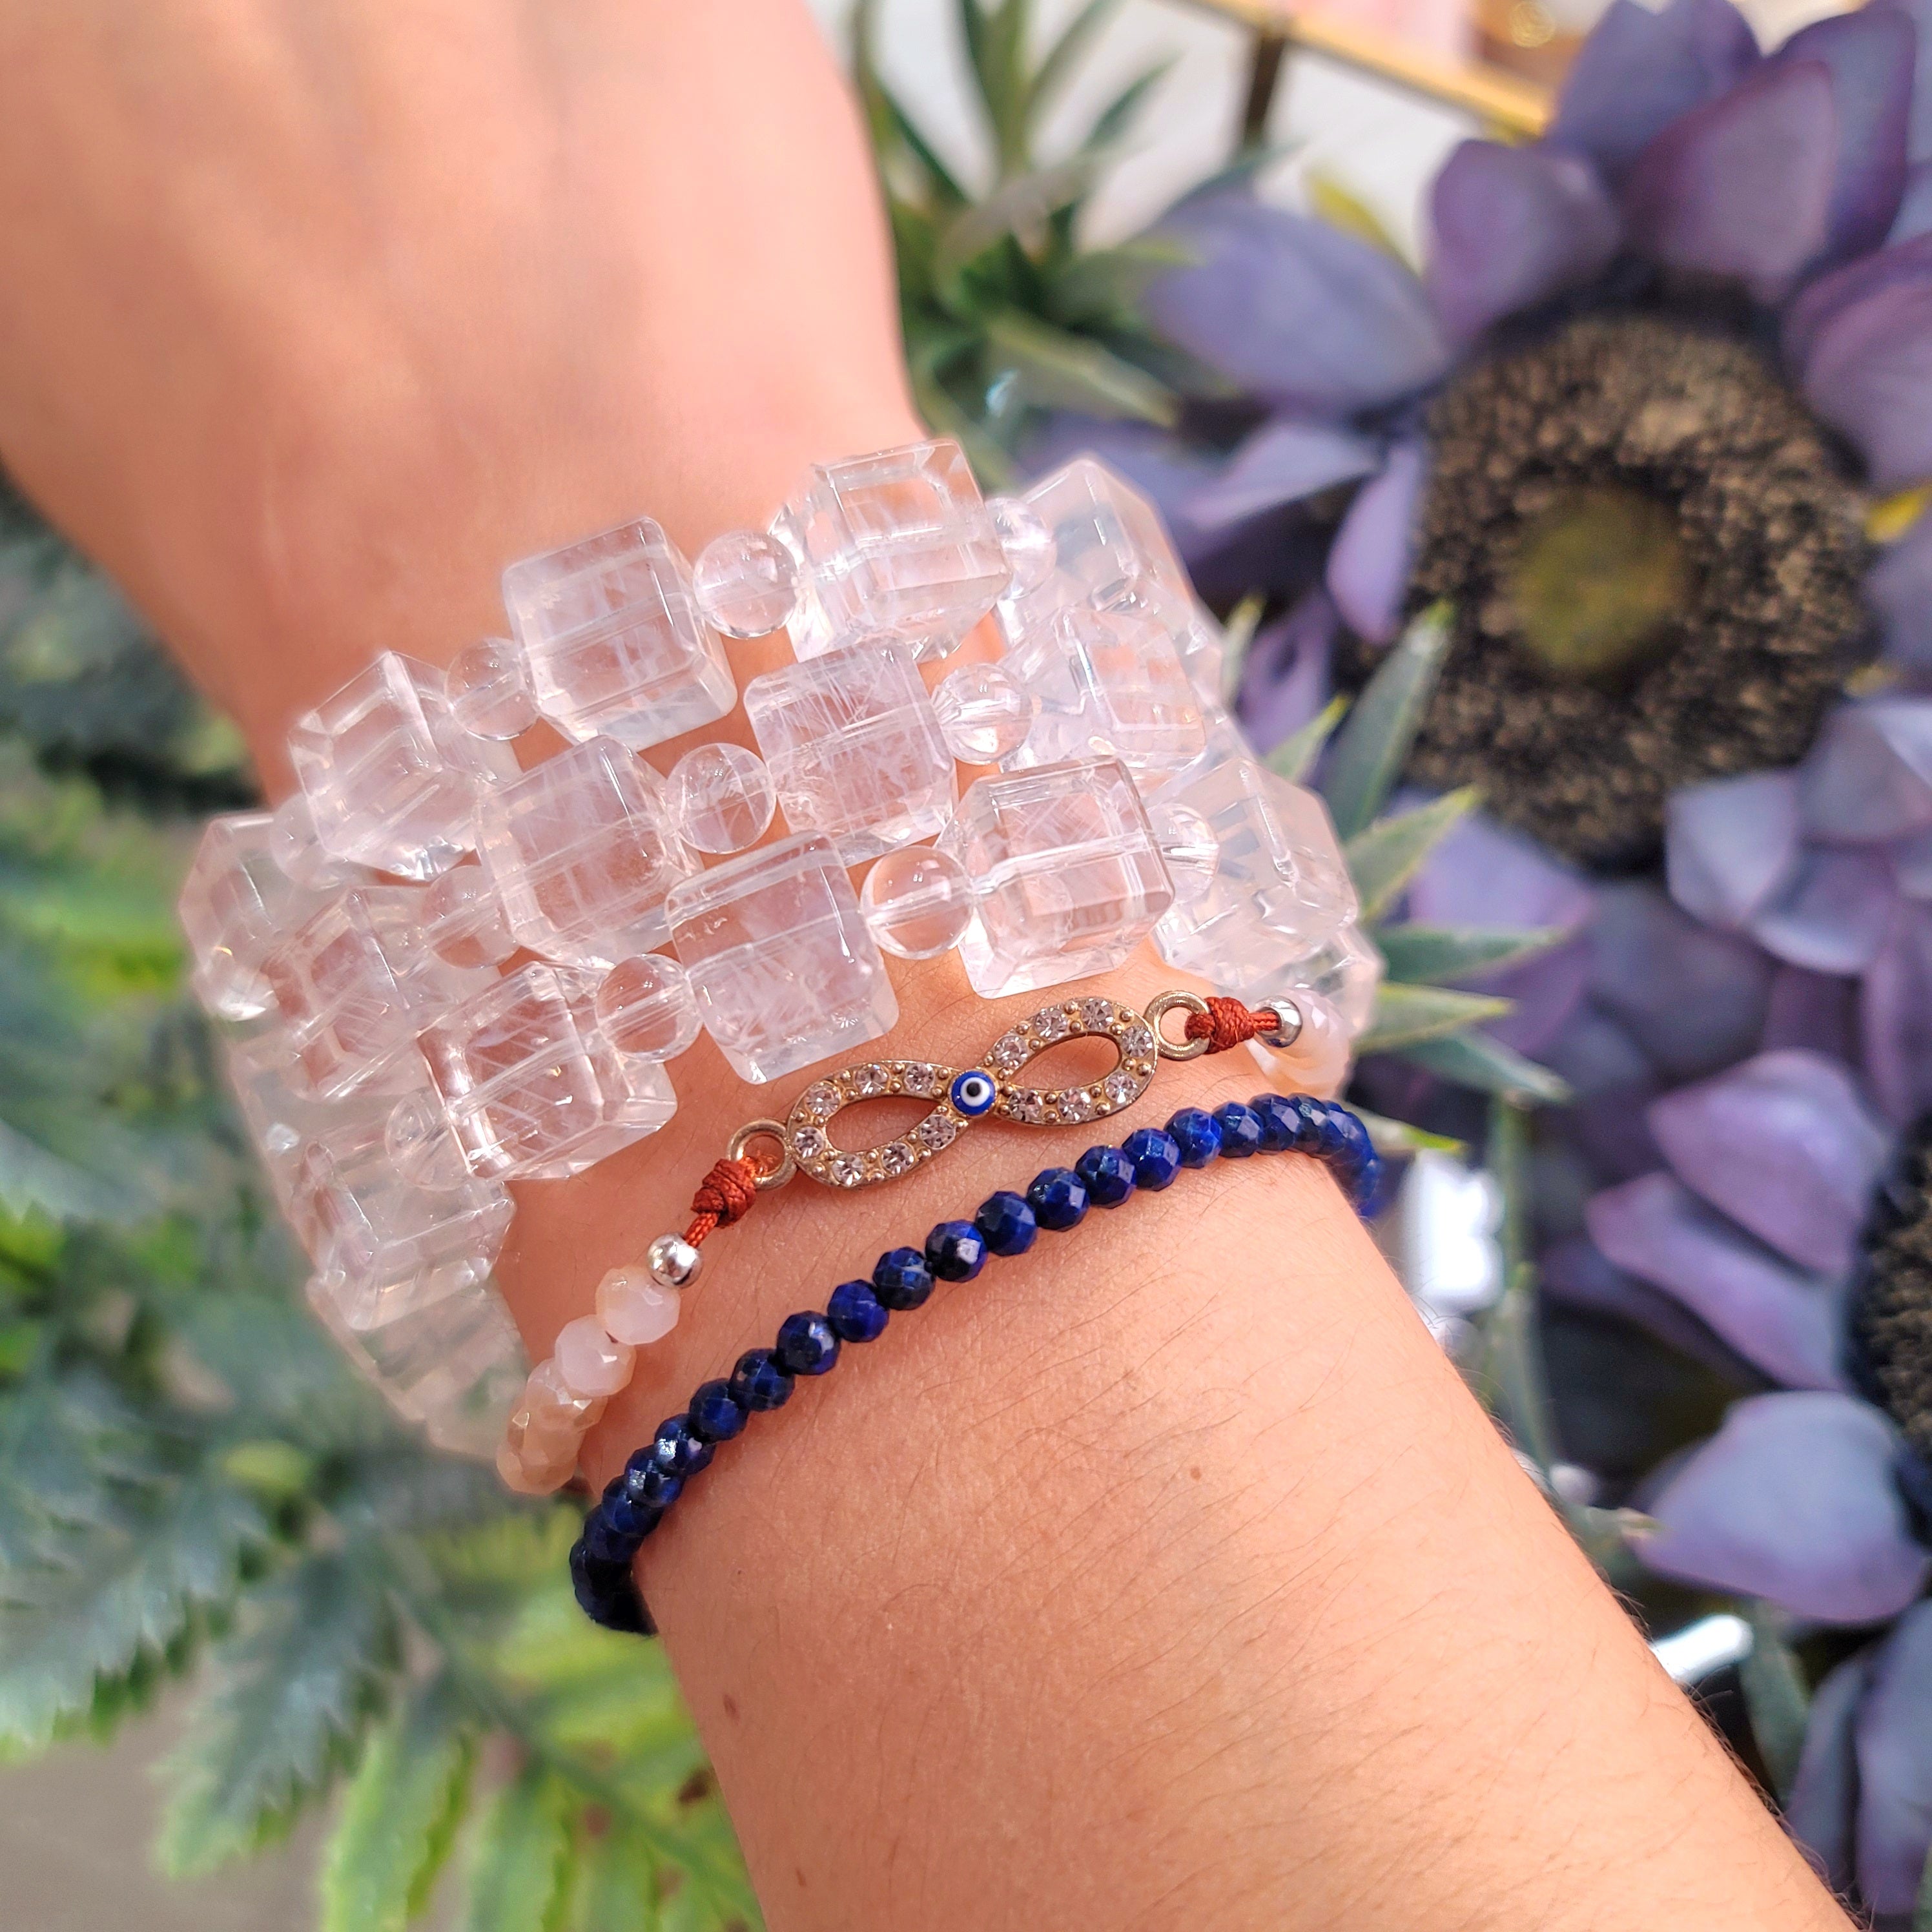 Blue Smoke Lemurian Quartz Cube Bracelet (AAA Grade) for Ascension, Connection with Ancestors & Angels and Wisdom